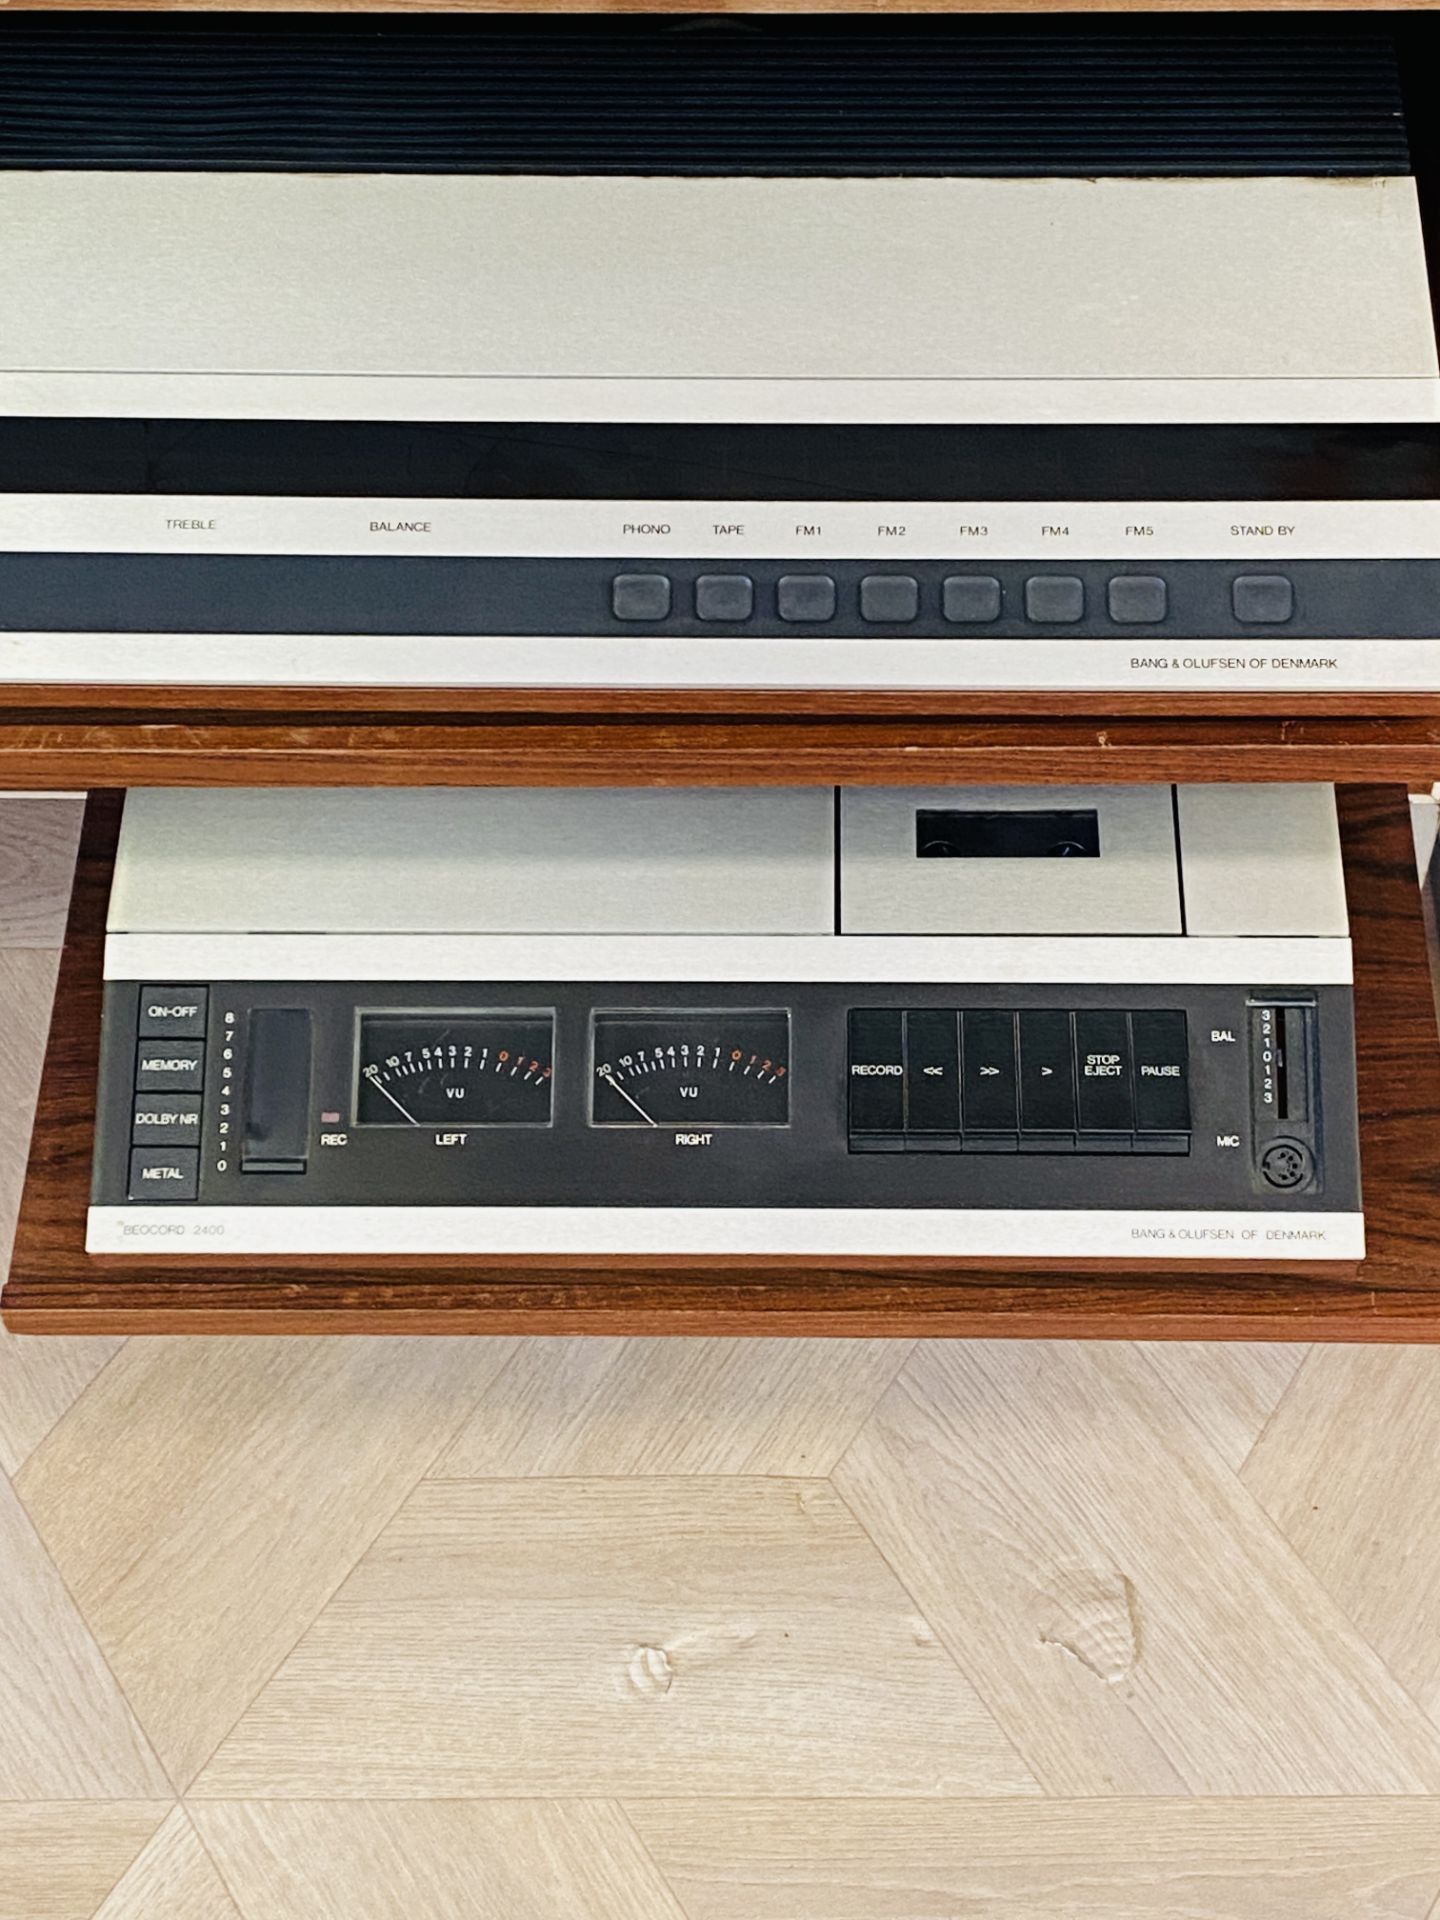 Bang & Olufsen Beomaster 1900-2; Beocord 2400, Beogram 2200 on stand; & Beovox S50's - Image 3 of 9